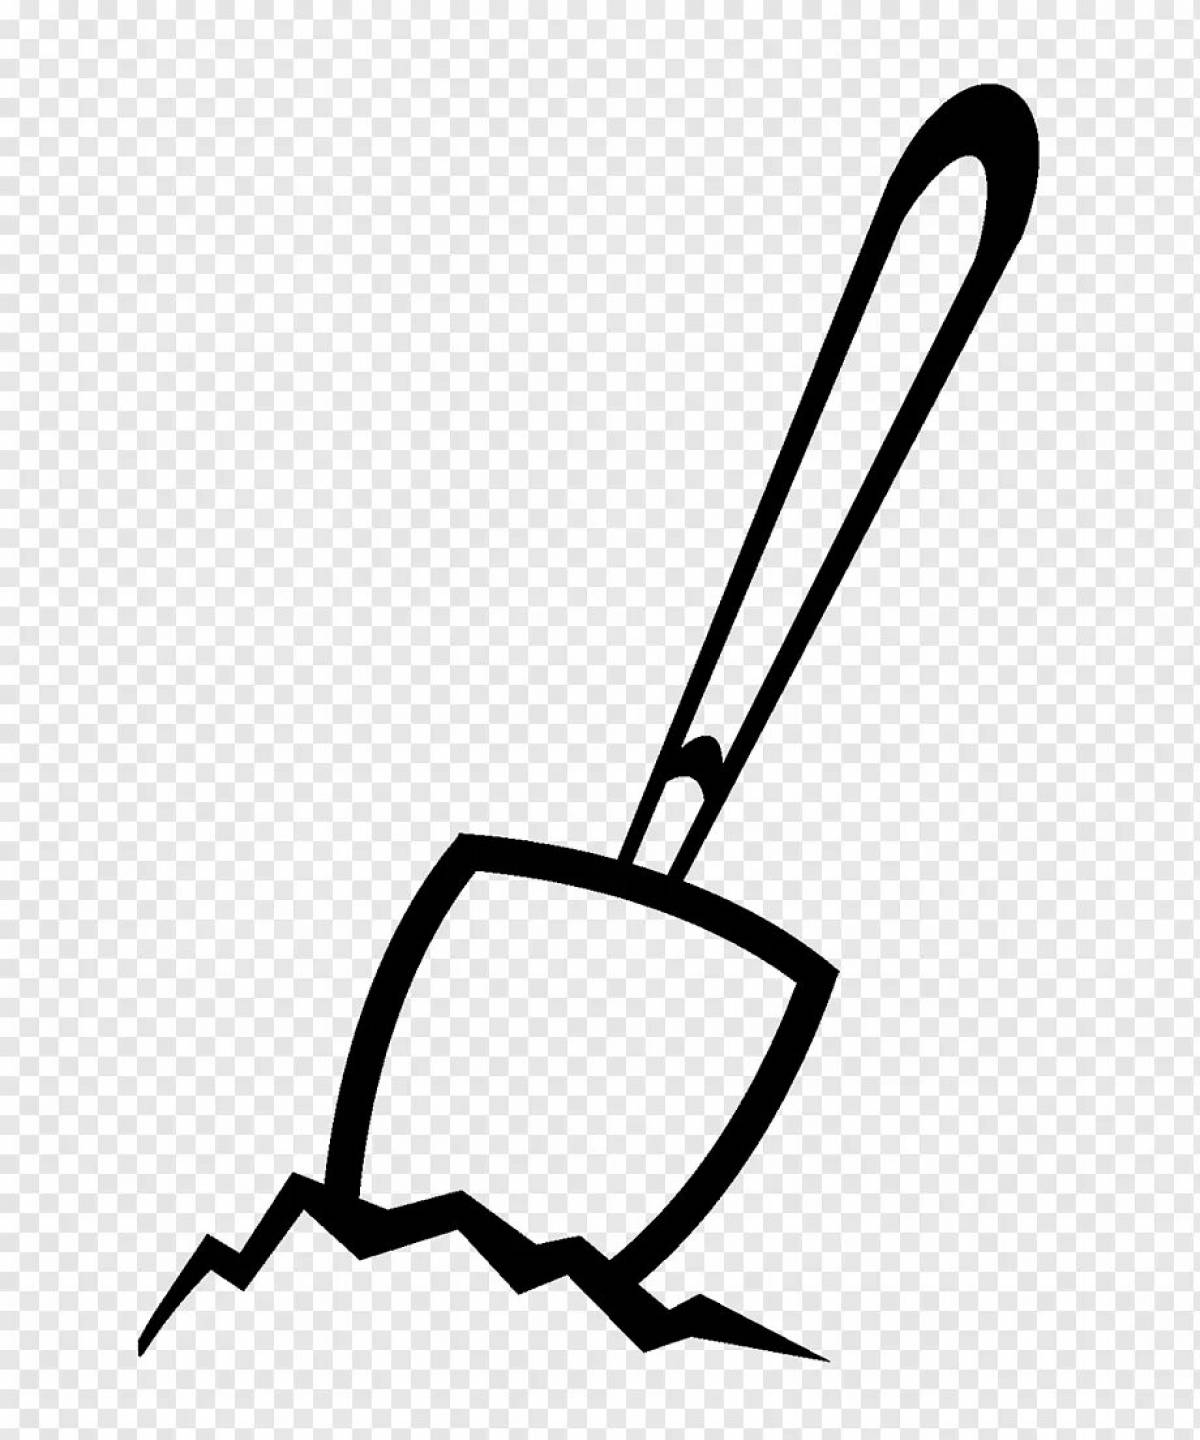 Shovel coloring page for beginners